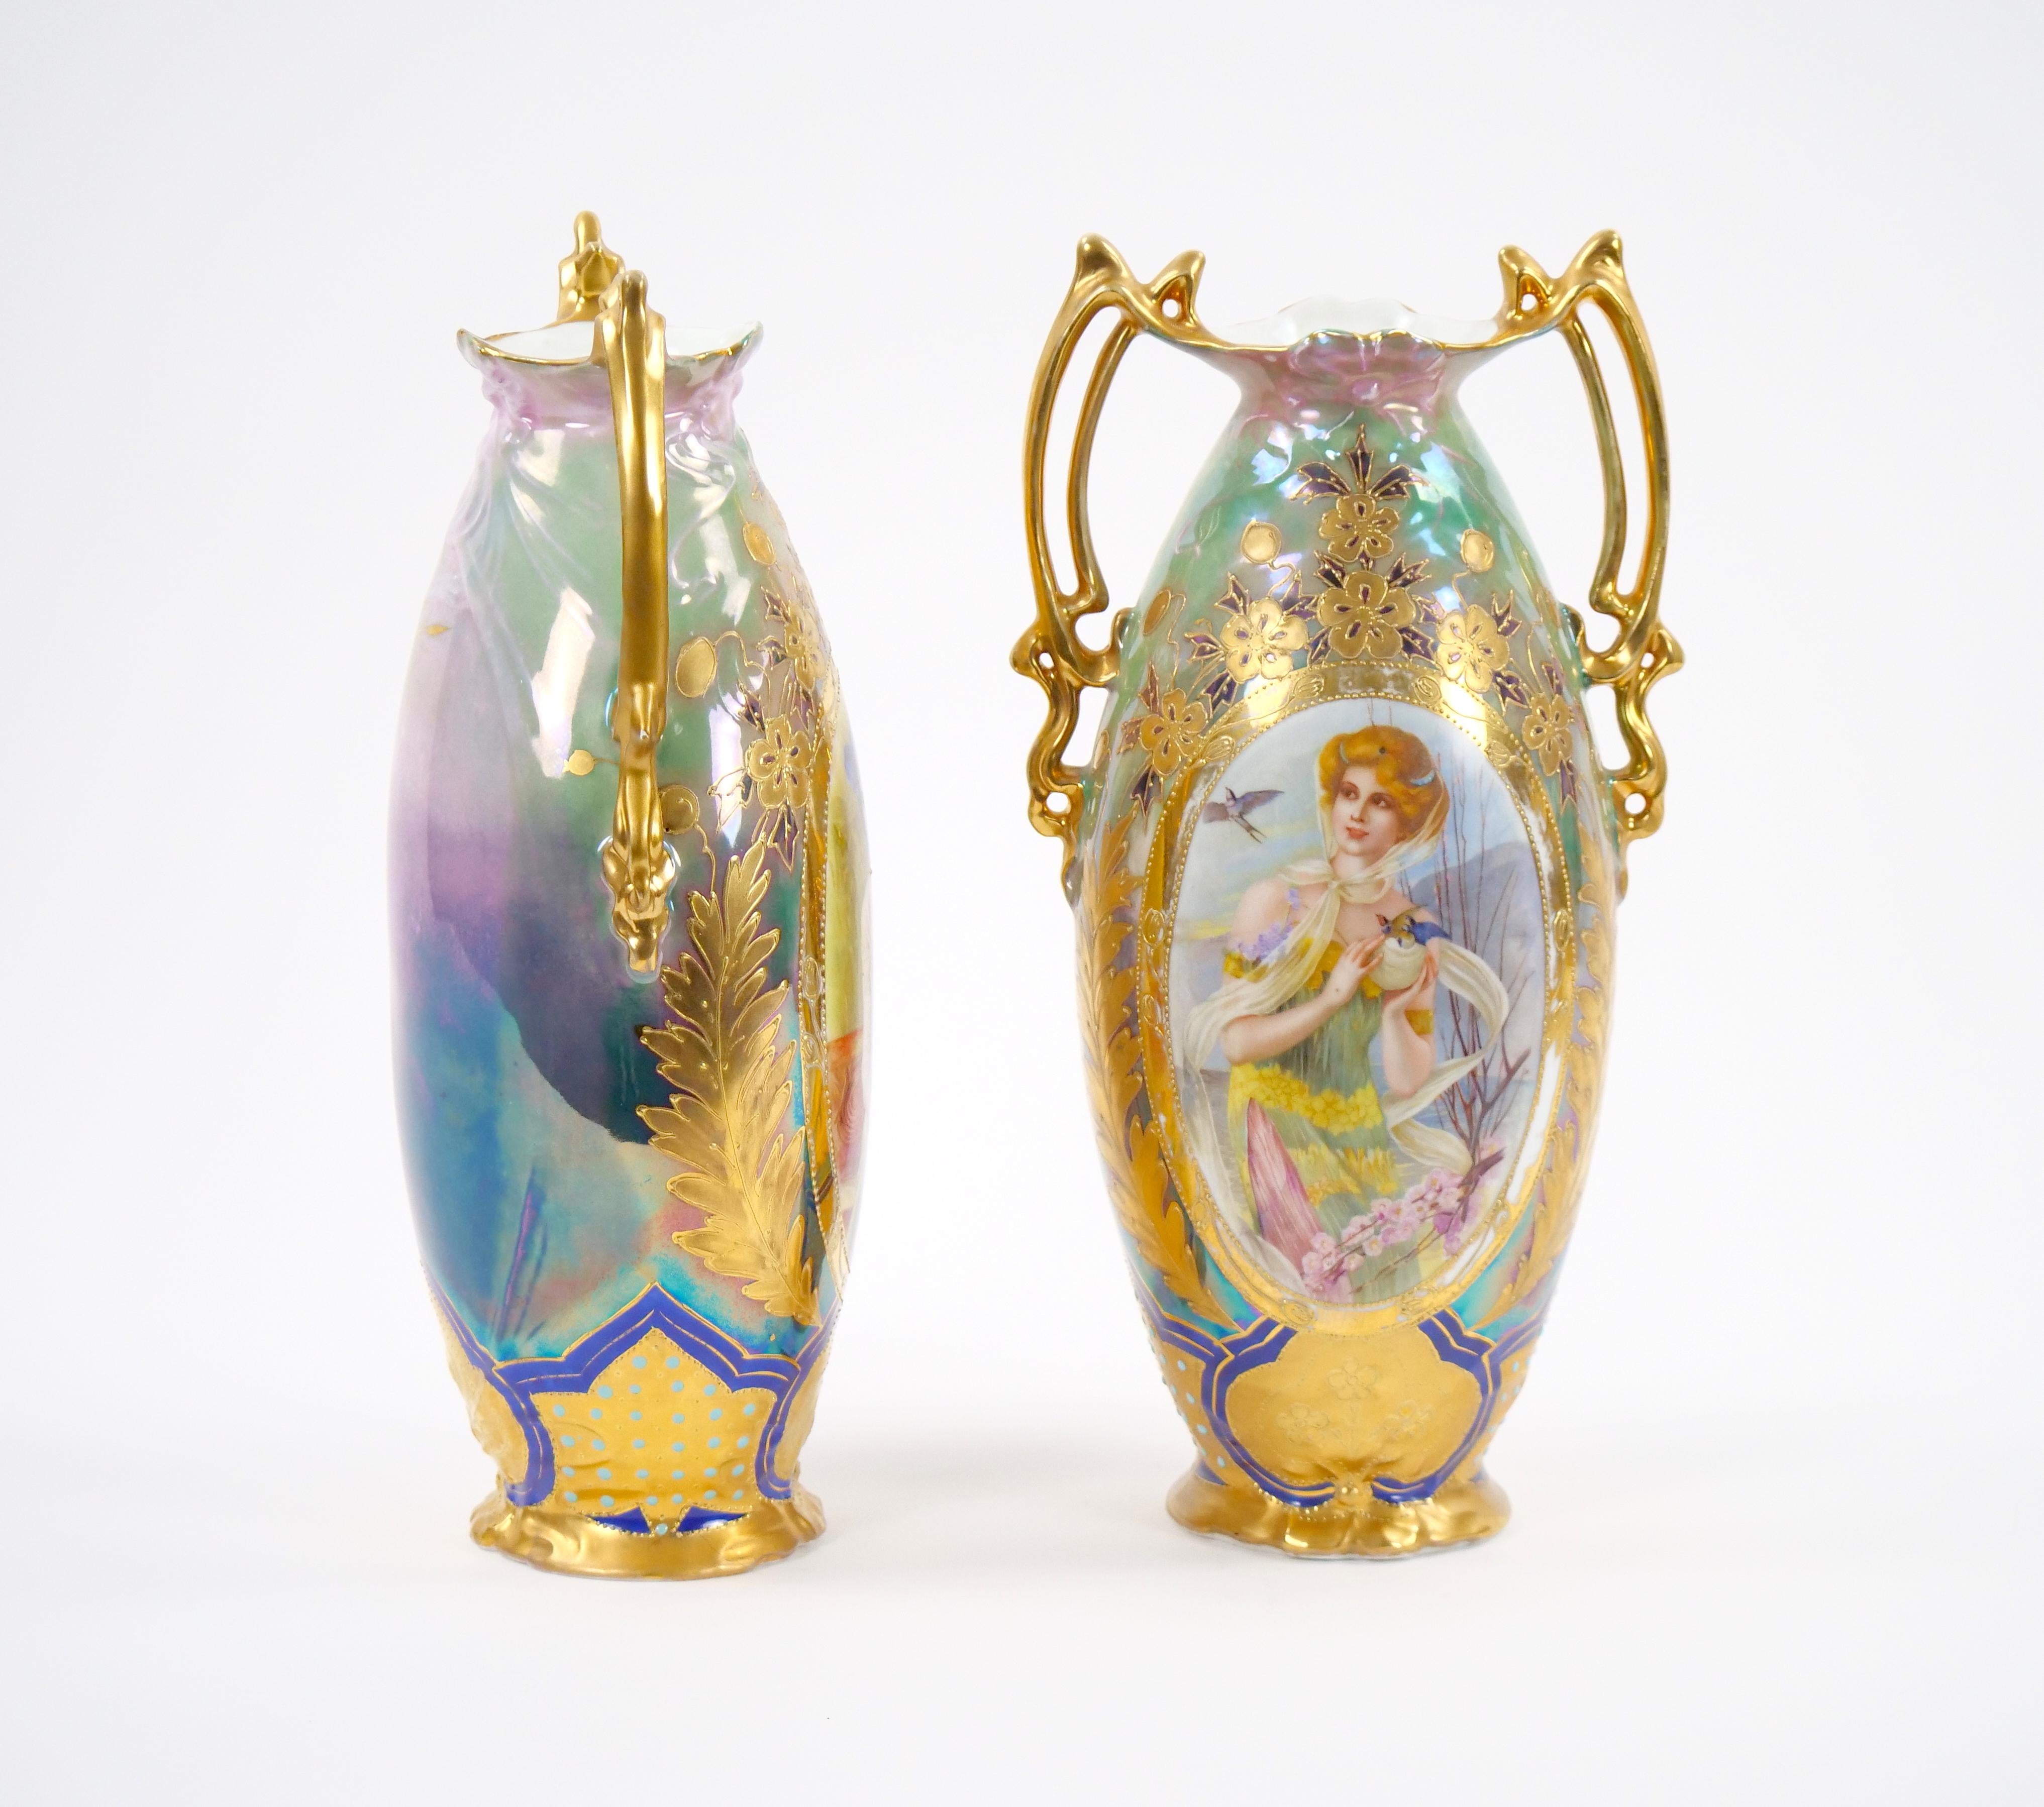 
Discover the allure of a bygone era with this exceptional pair of early 20th century German Art Nouveau porcelain vases. Imbued with the elegance of the art nouveau movement, each vase is a masterpiece of hand-painted craftsmanship and intricate